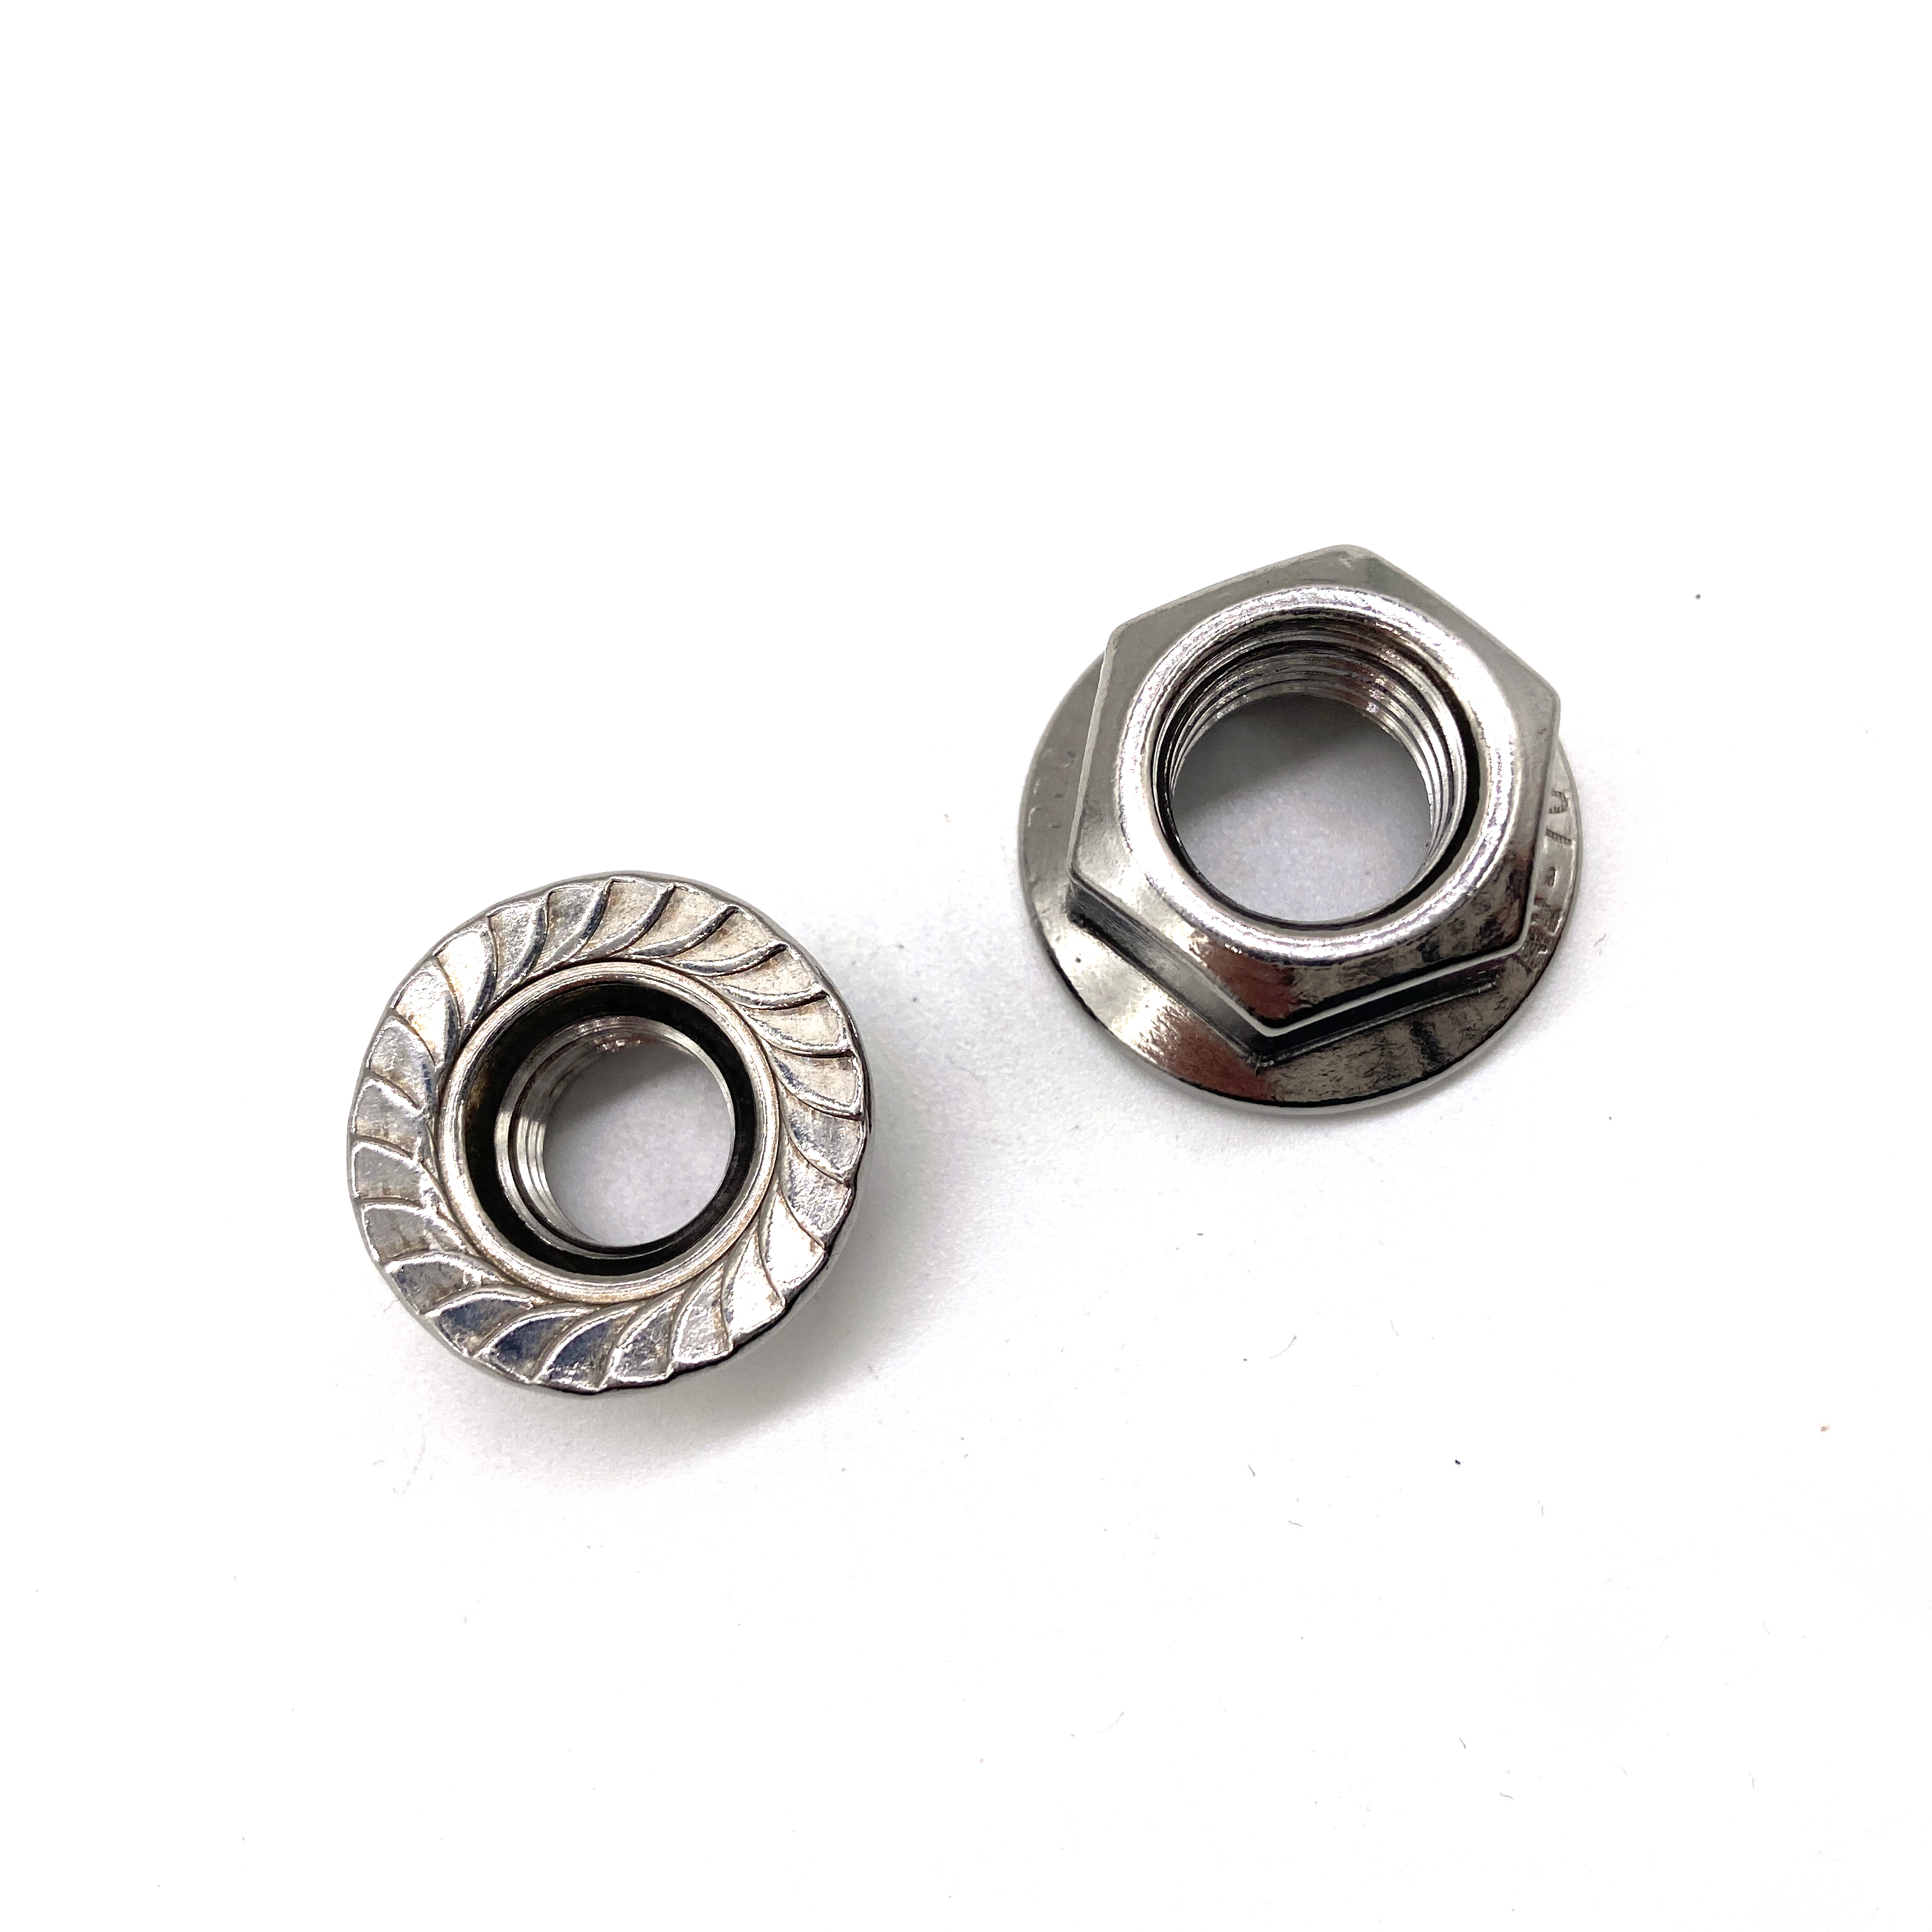  INOX A4 INOX A2 DIN 6923 Factory SS304 SS316 Stainless Hex Flange Nut